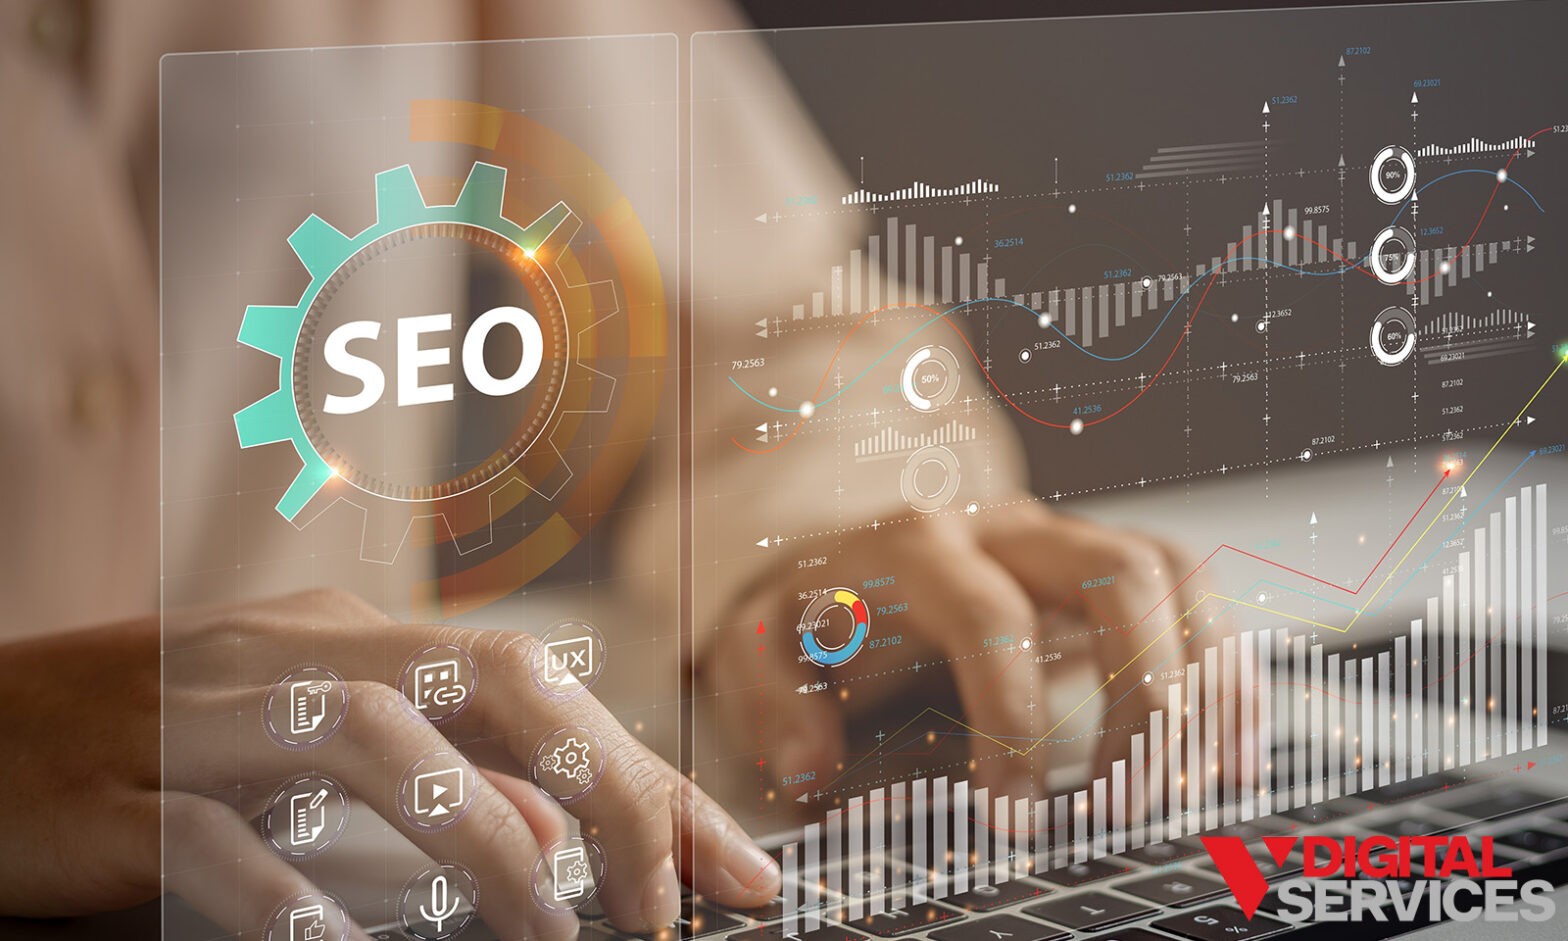 How to Build an Effective SEO Content Strategy